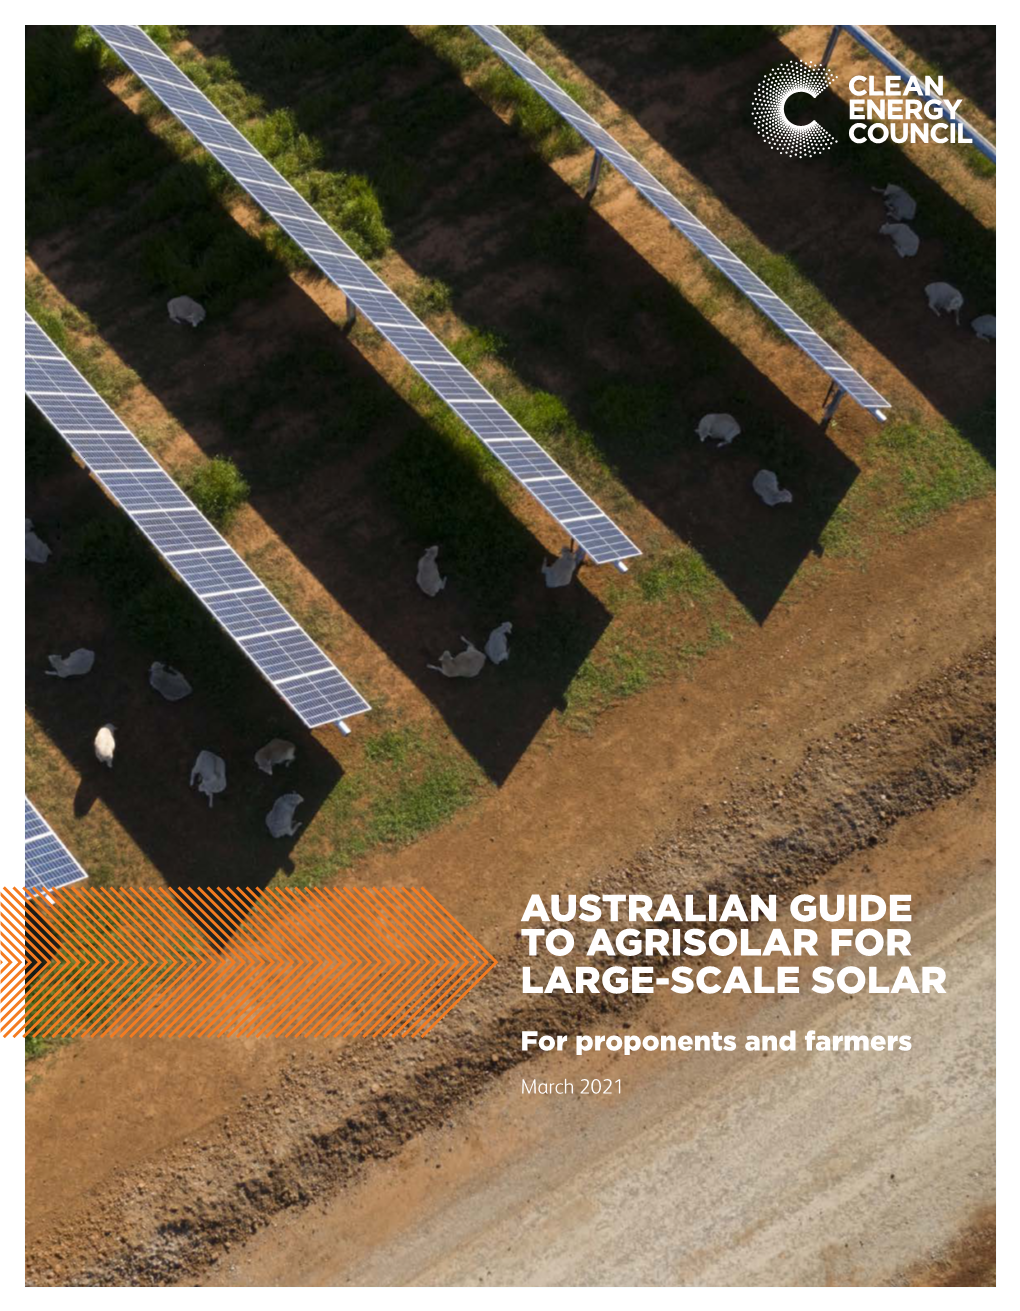 Australian Guide to Agrisolar for Large-Scale Solar